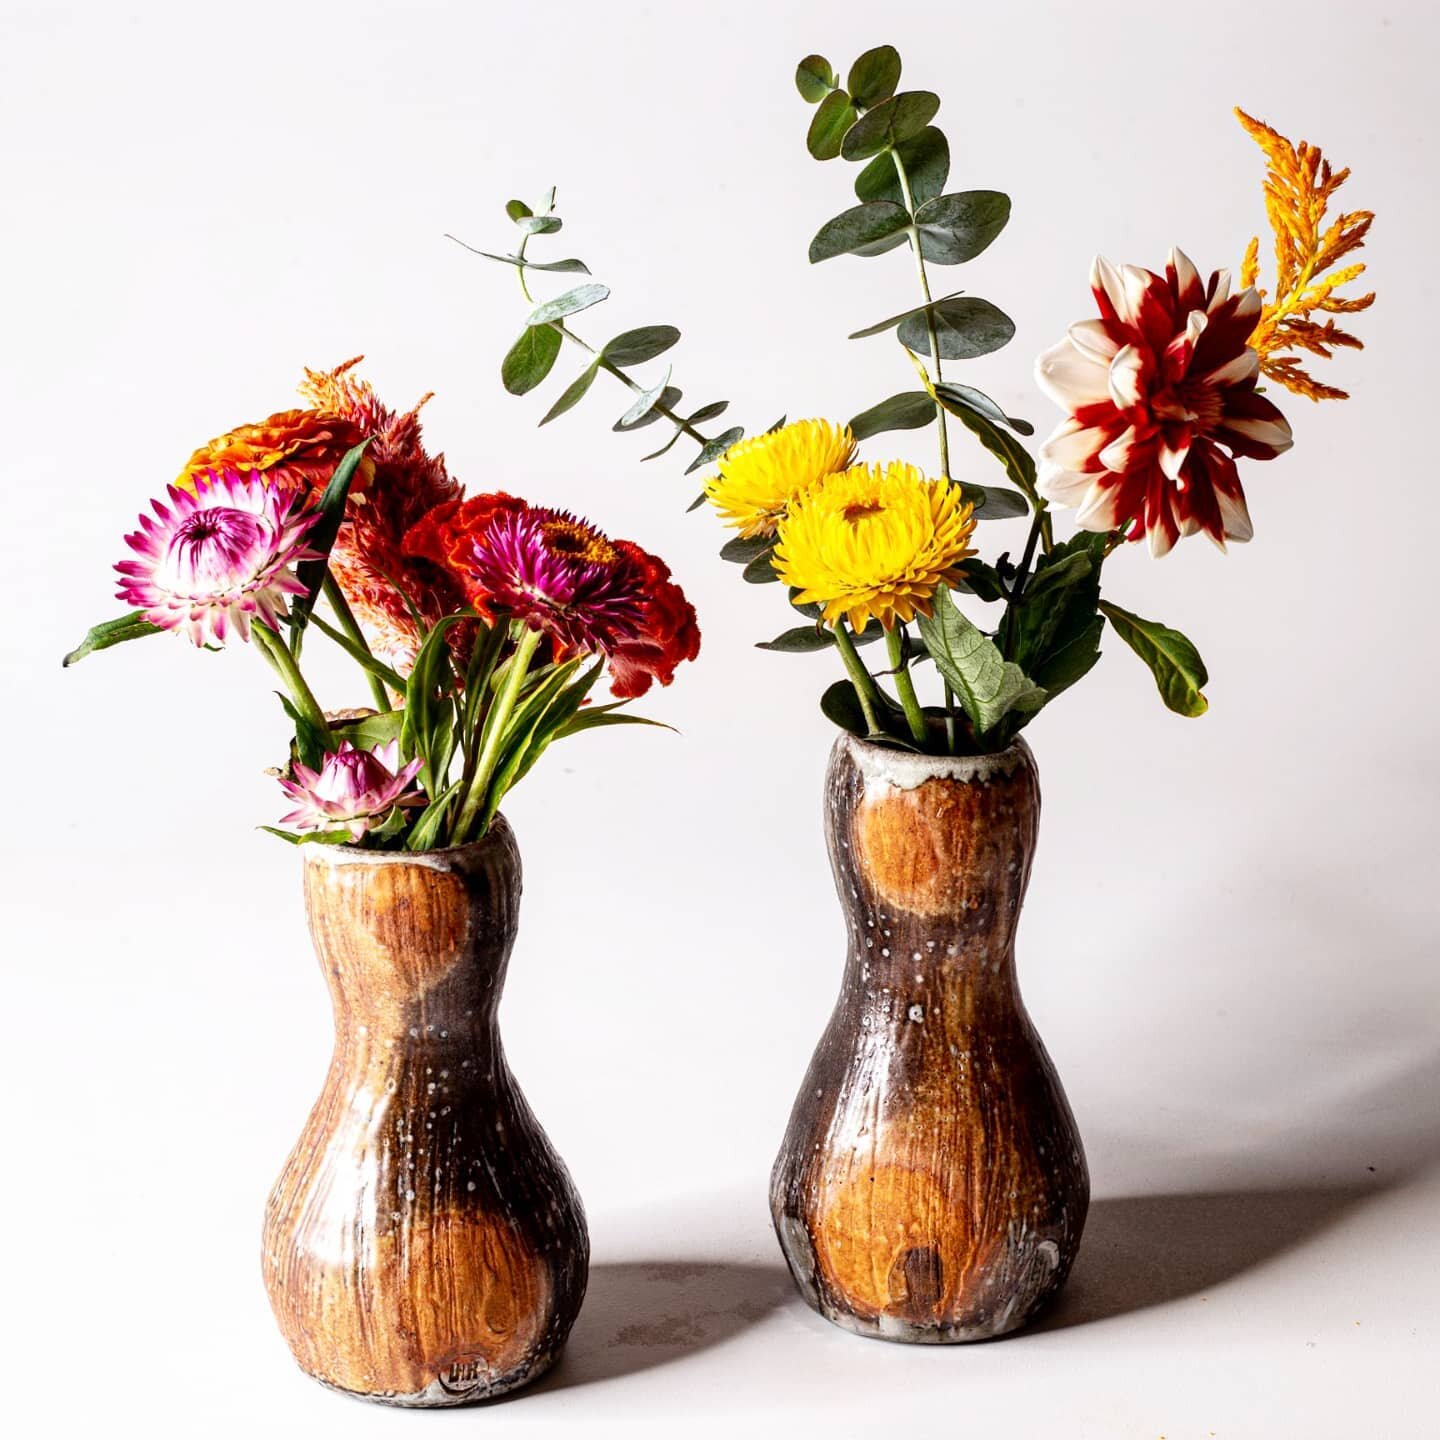 Bud vases for this weekend's @throwntogetherpotters show! My online shop opens at noon on Friday.

Flowers from my friends at @butterbee_farm who just moved to their new farm. Wishing them all the best. 

#vase #budvase #flowers #pottery #sodafired #